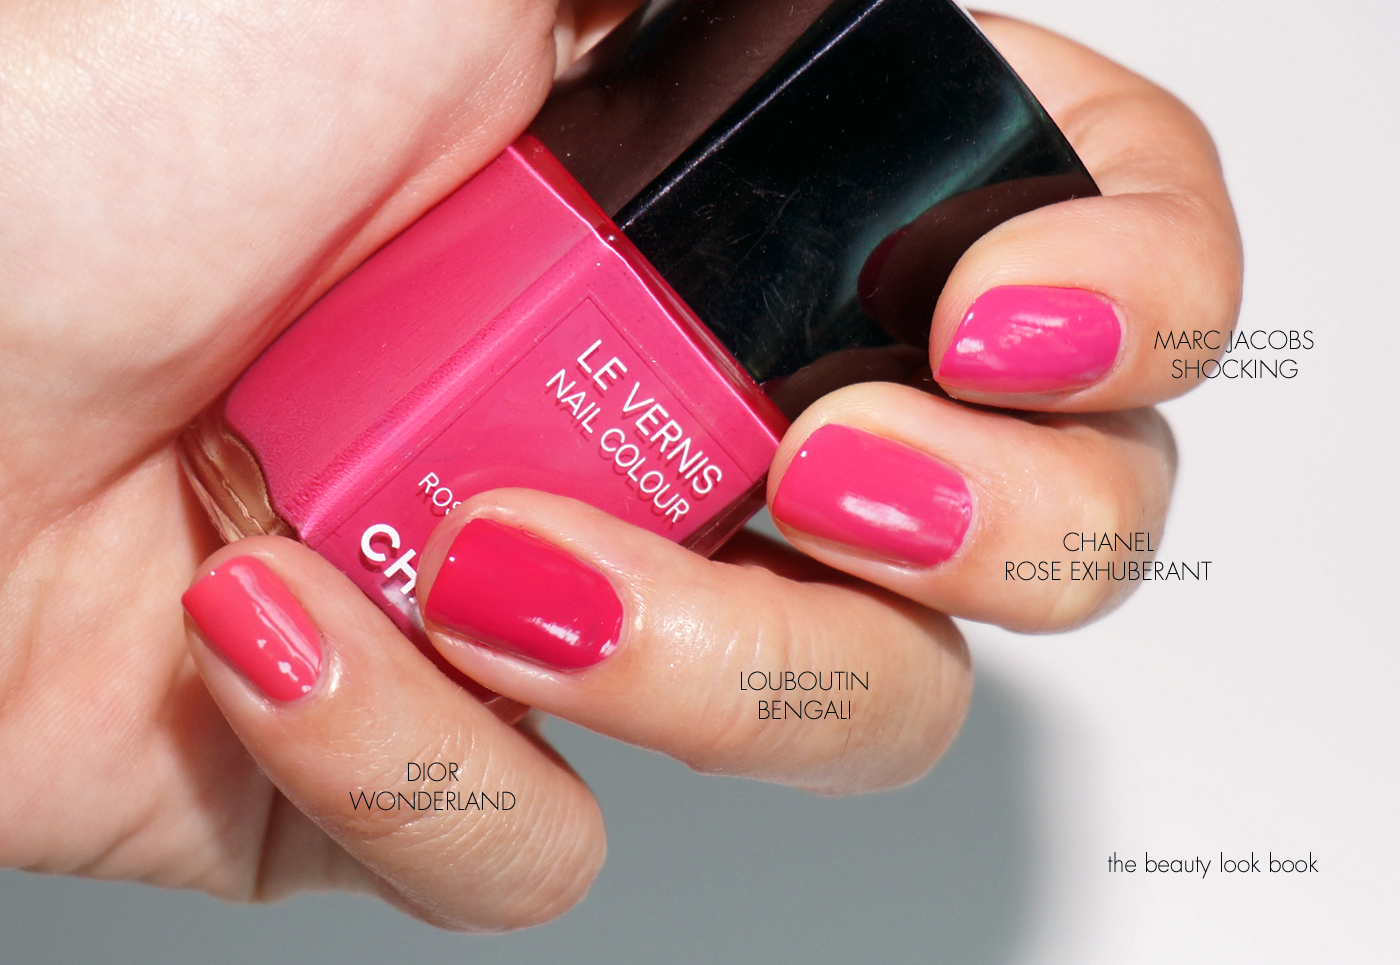 Nail Polish Archives - Page 6 of 55 - The Beauty Look Book